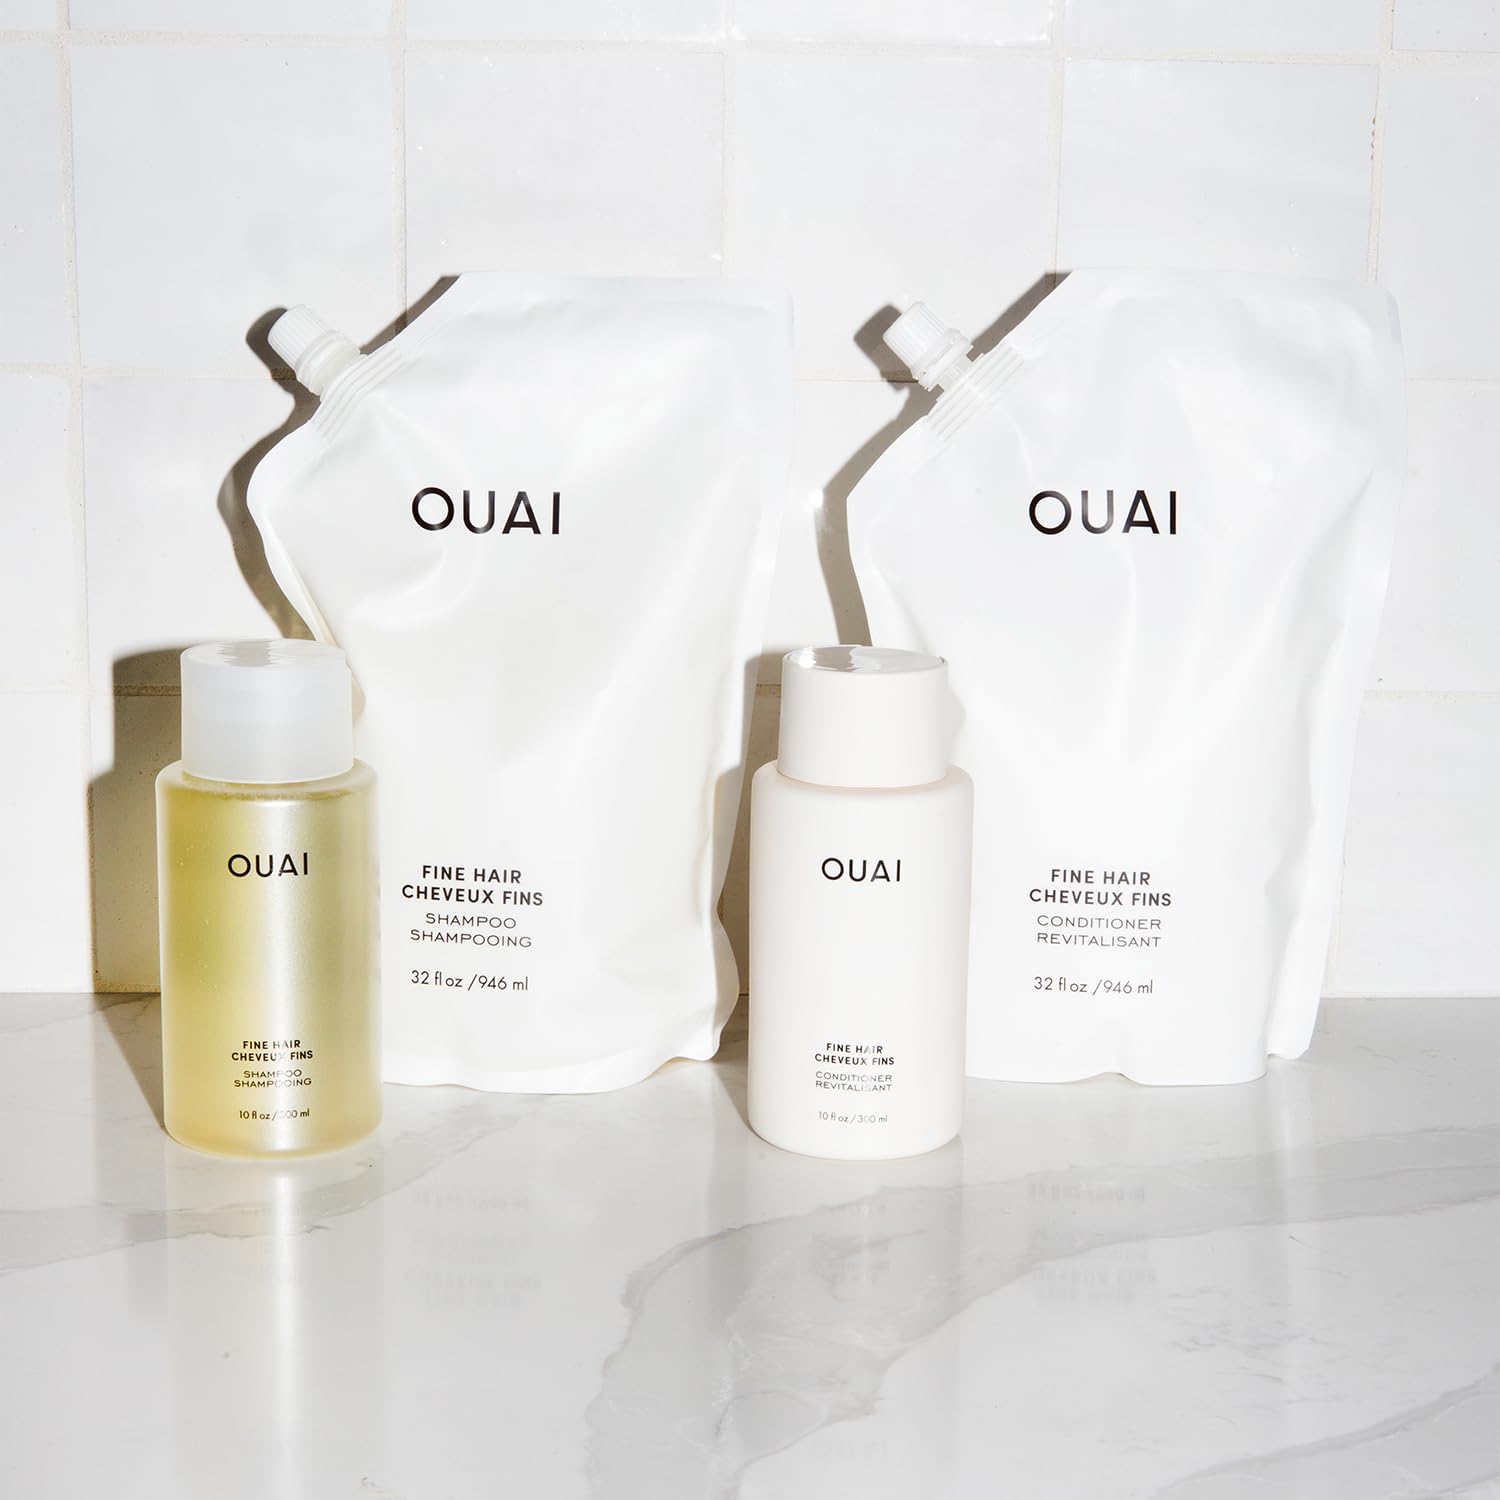 OUAI Fine Shampoo - Volumizing Shampoo with Strengthening Keratin, Biotin & Chia Seed Oil for Fine Hair - Delivers Clean, Weightless Body - Paraben, Phthalate & Sulfate Free Hair Care - 10 fl oz : Beauty & Personal Care